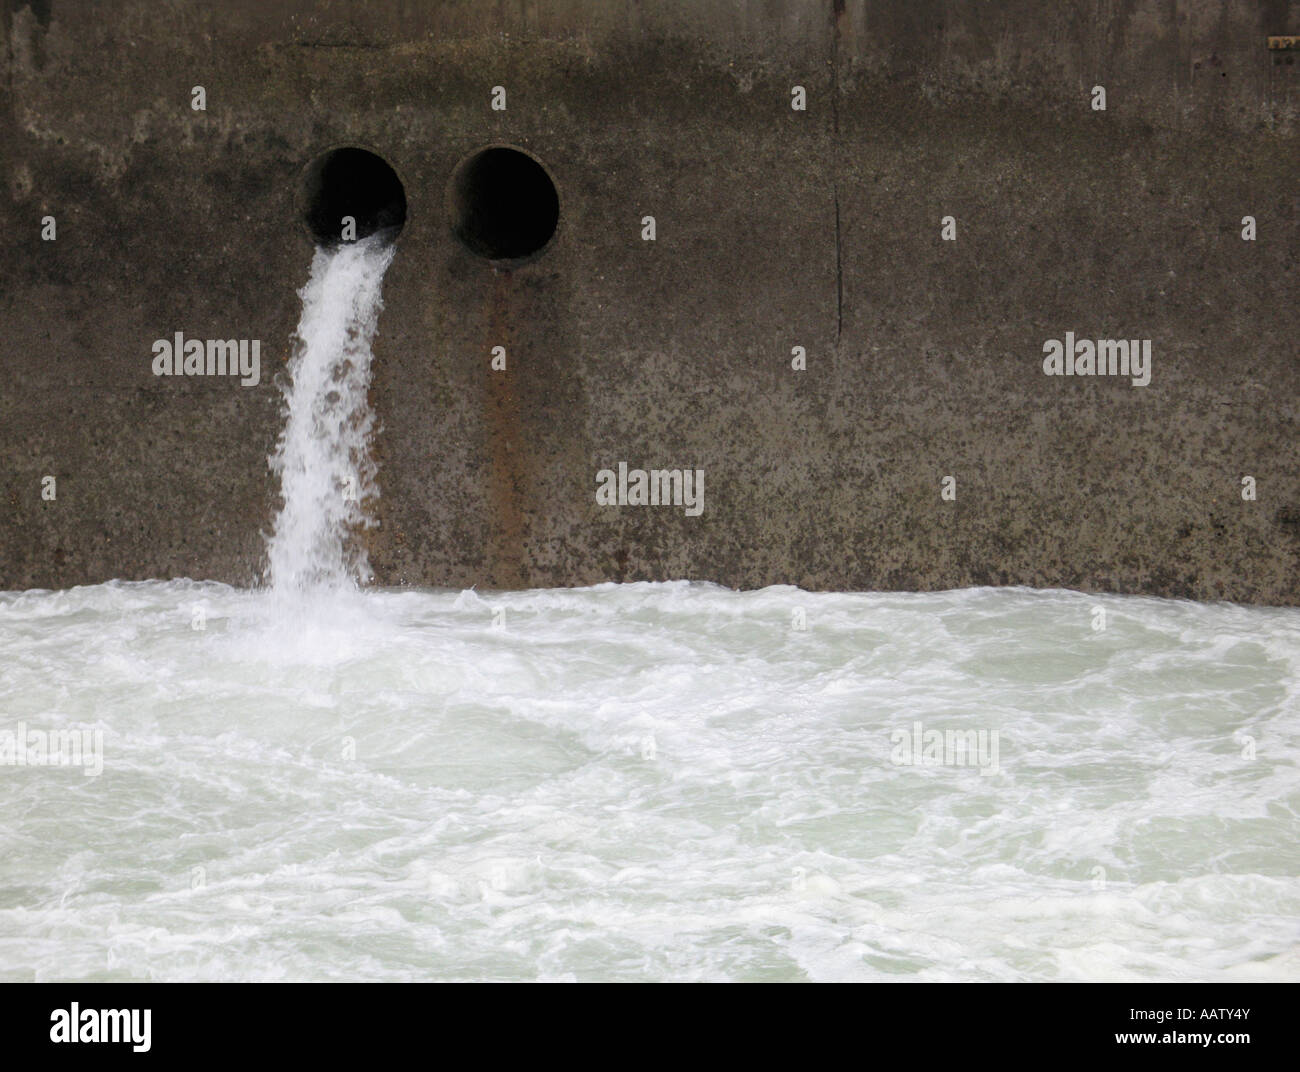 Outfall from a waste pipe Stock Photo